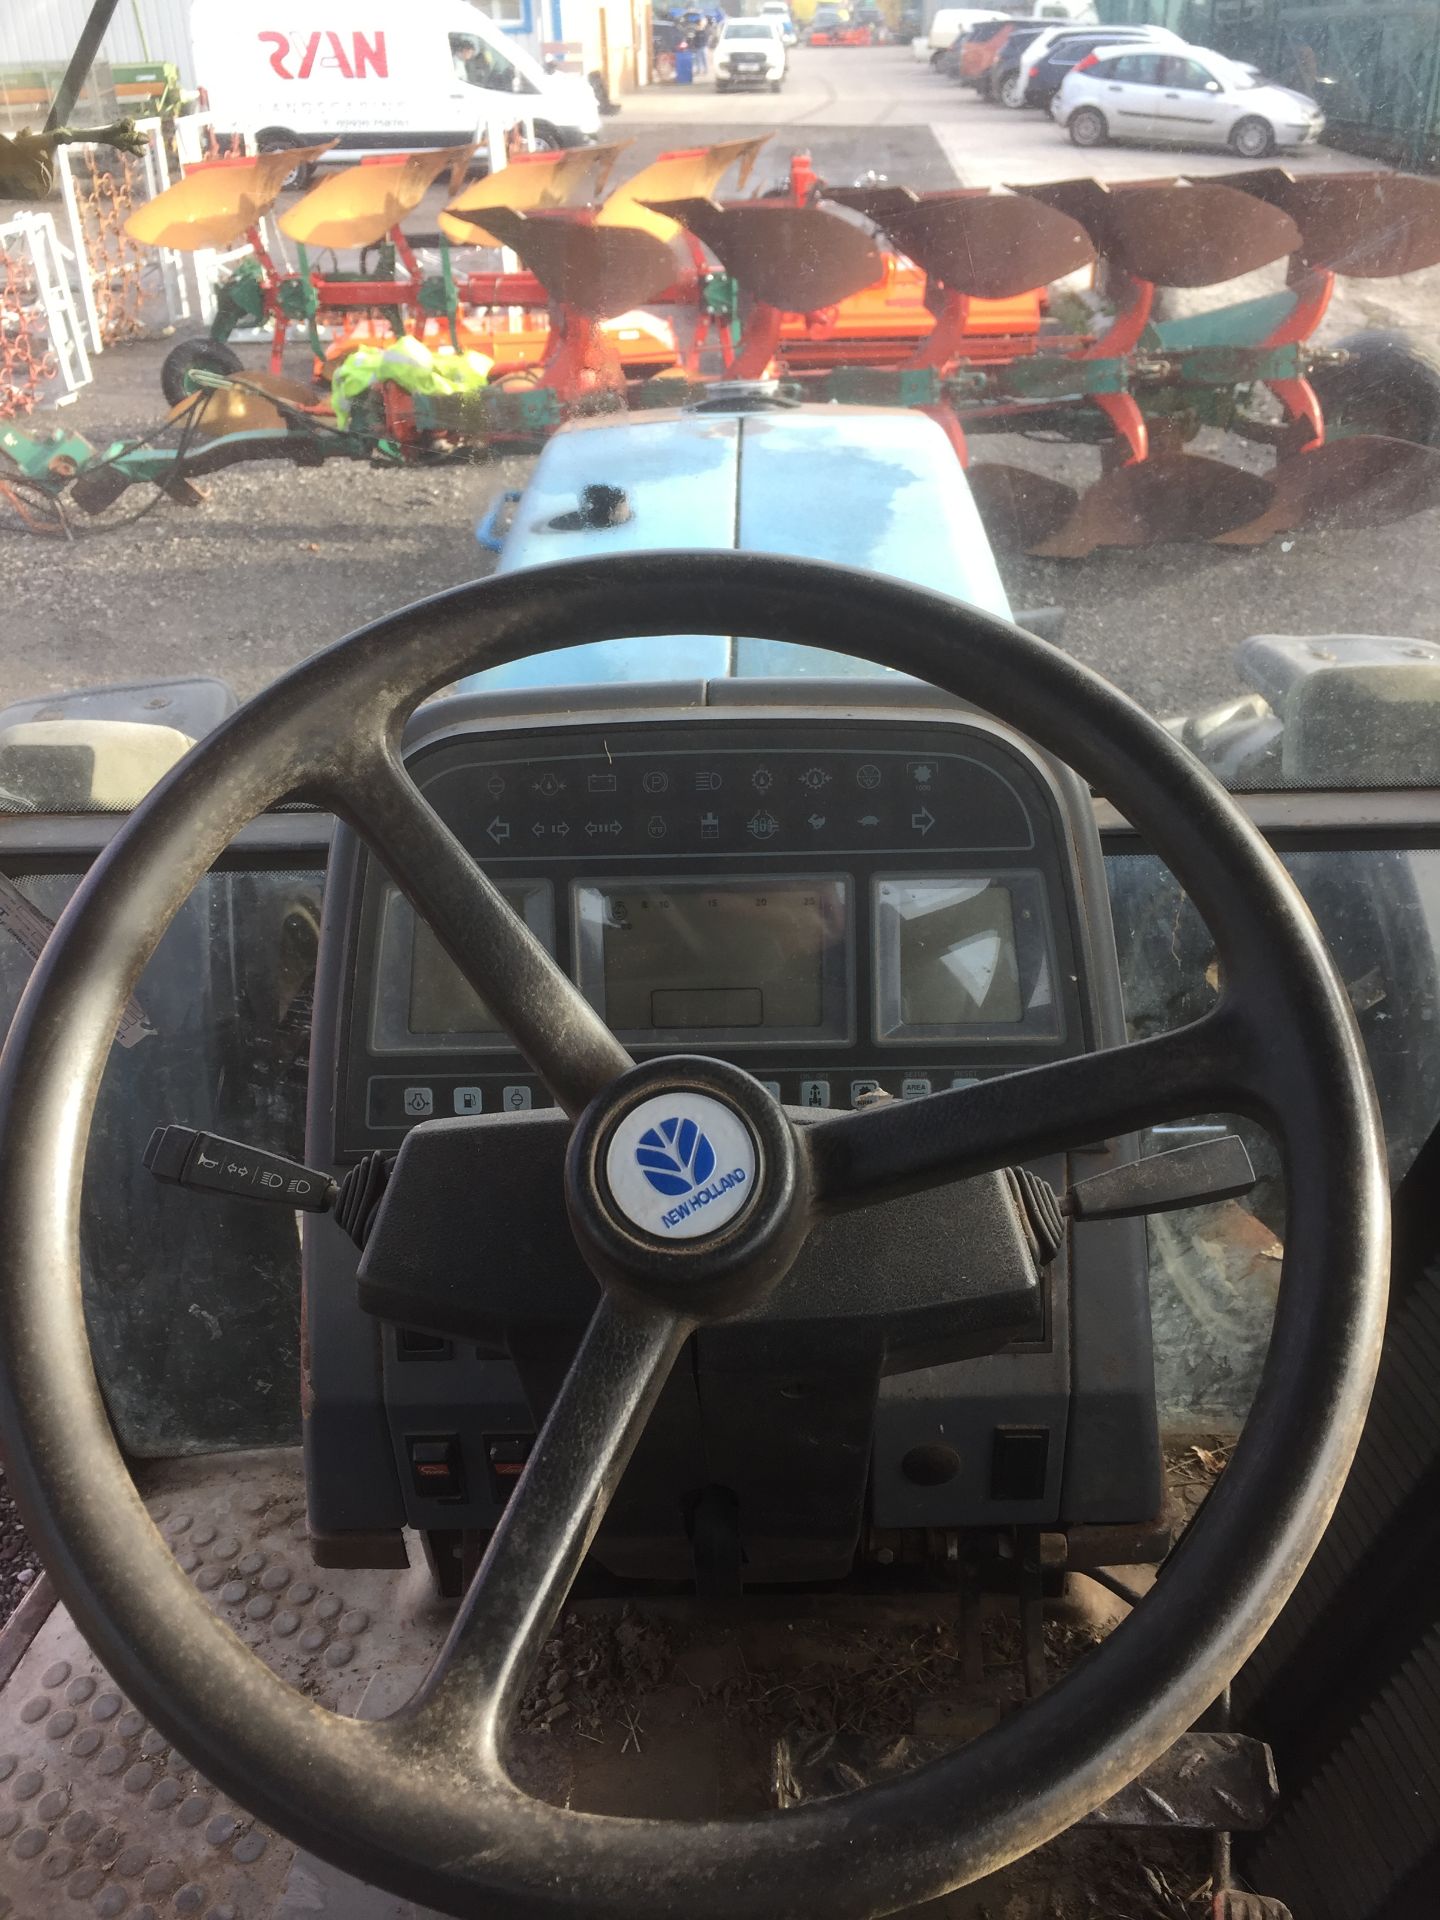 New Holland 8340 4wd tractor, Registration No. N367 NAD Hours: 1752 (not verified) - Image 5 of 5